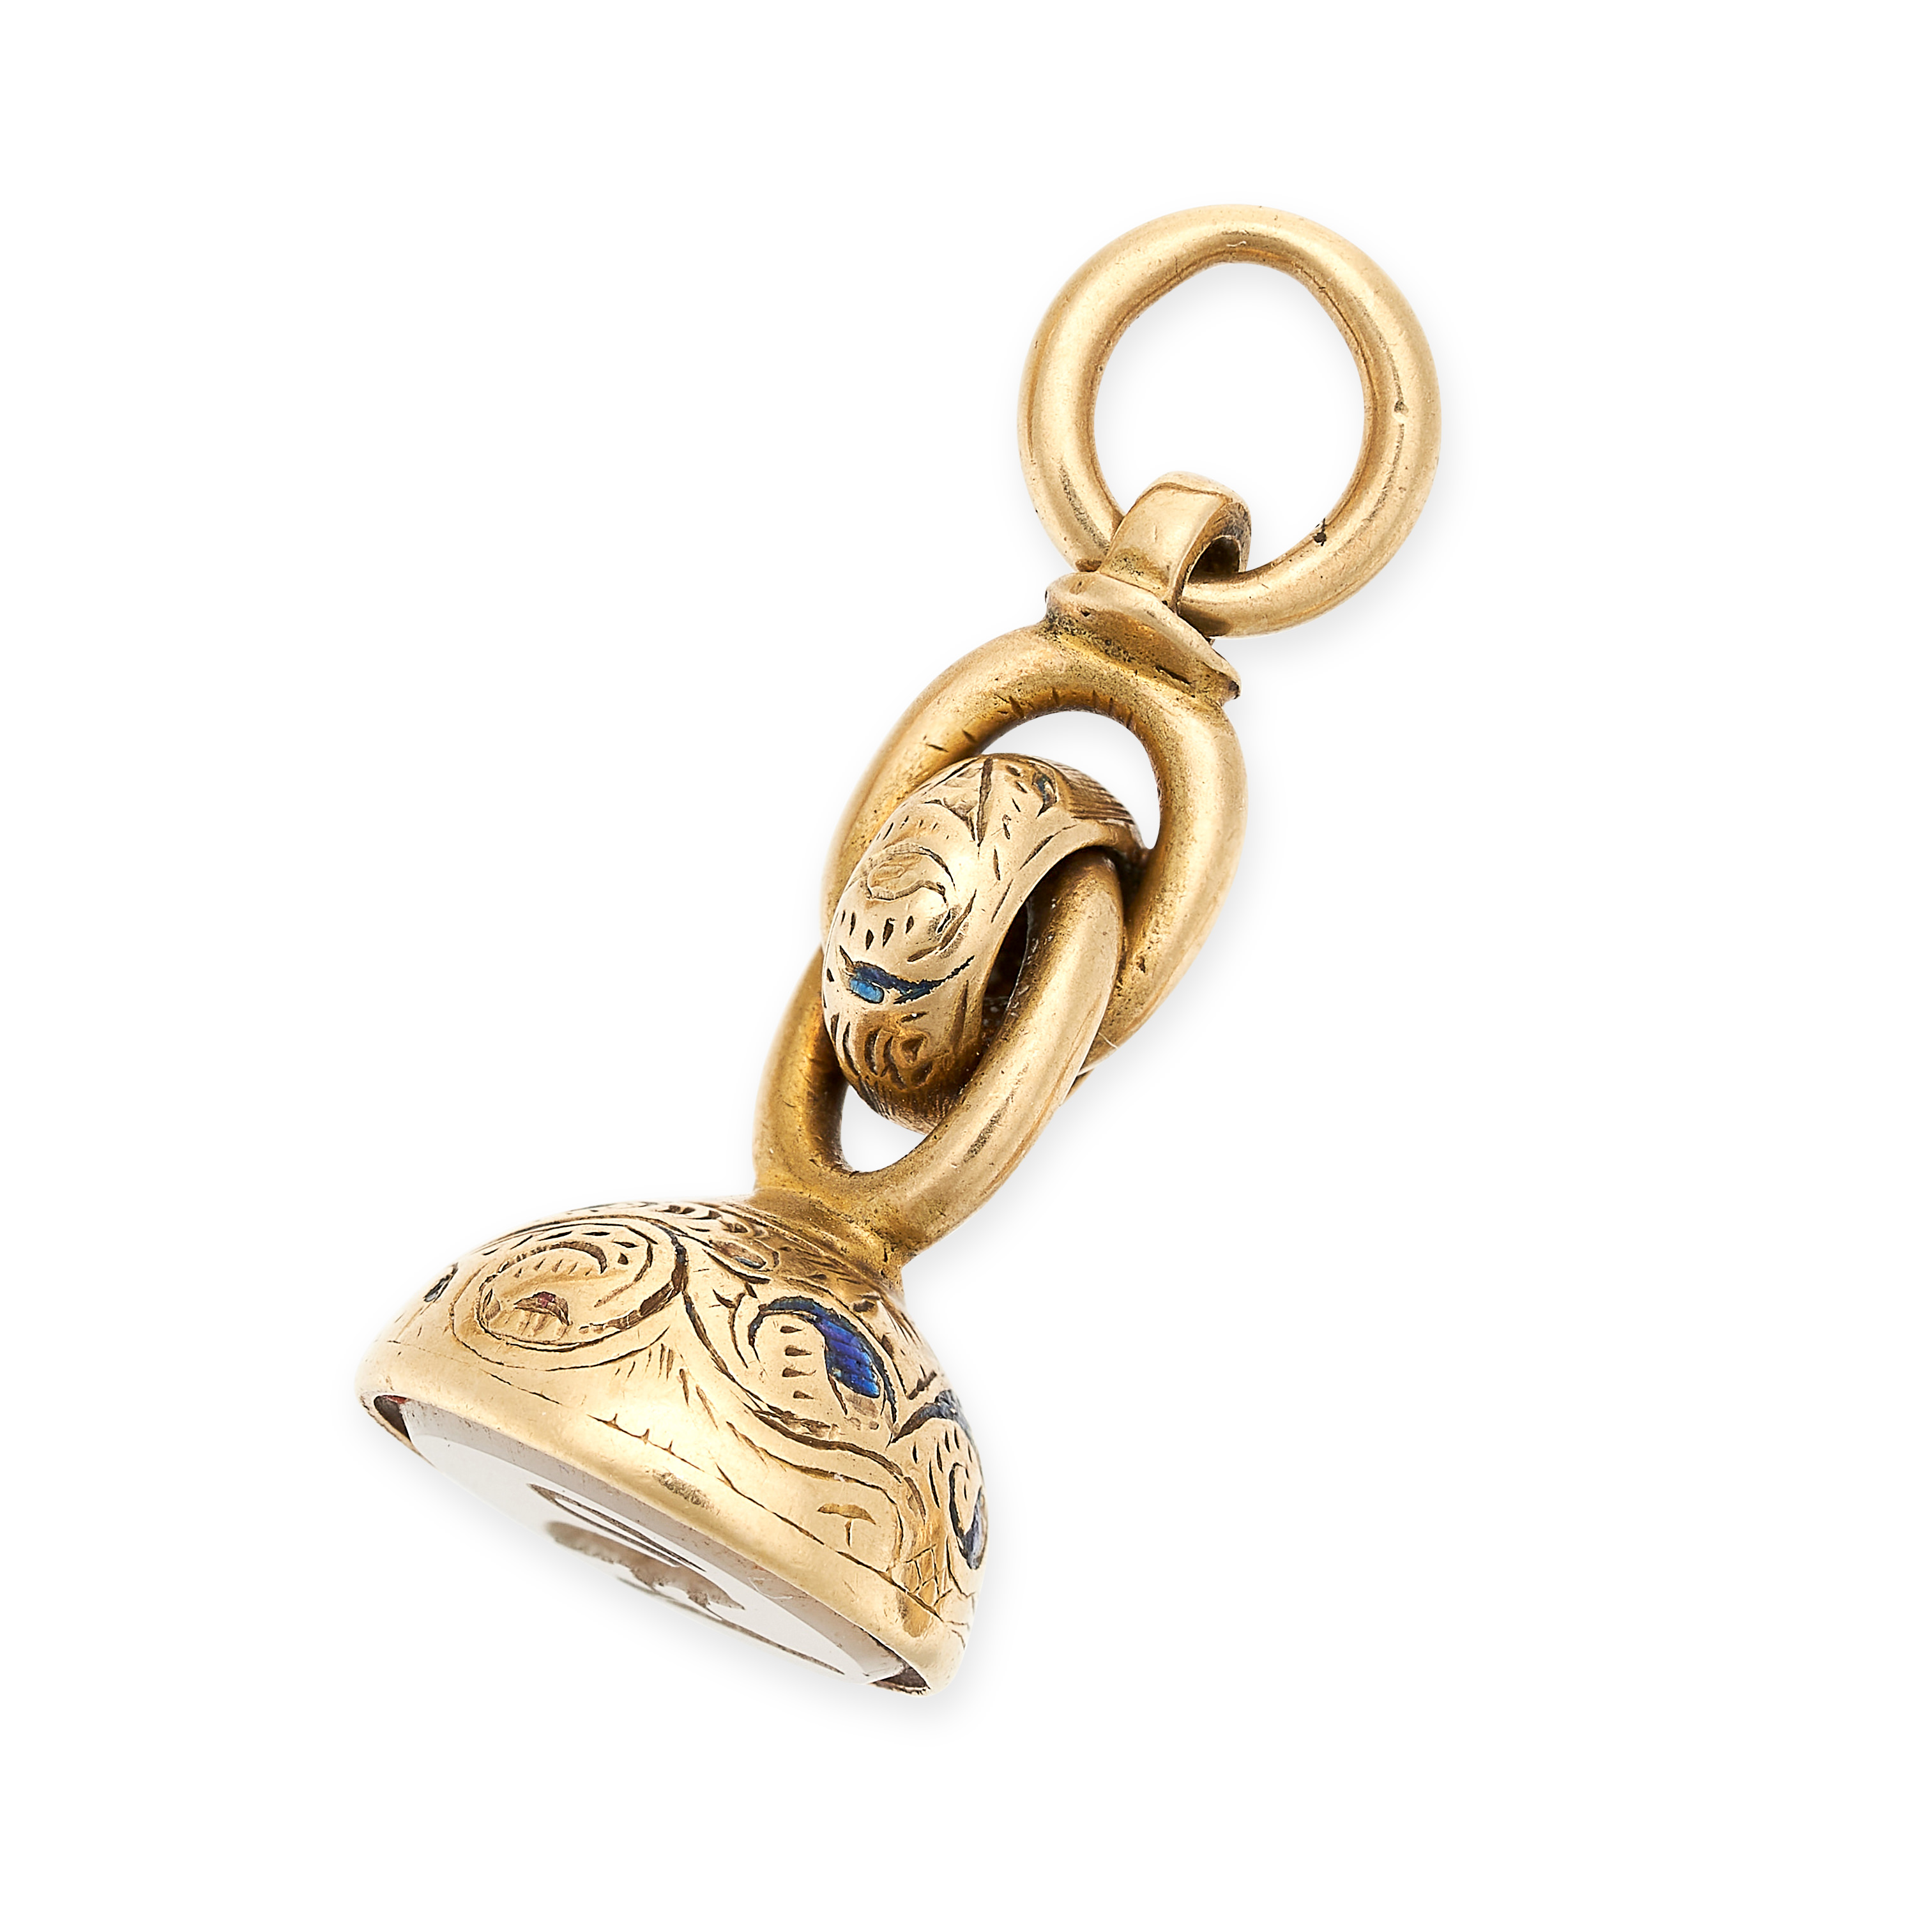 NO RESERVE - AN ANTIQUE MINIATURE CHALCEDONY INTAGLIO FOB SEAL PENDANT in yellow gold, set with a - Image 2 of 3